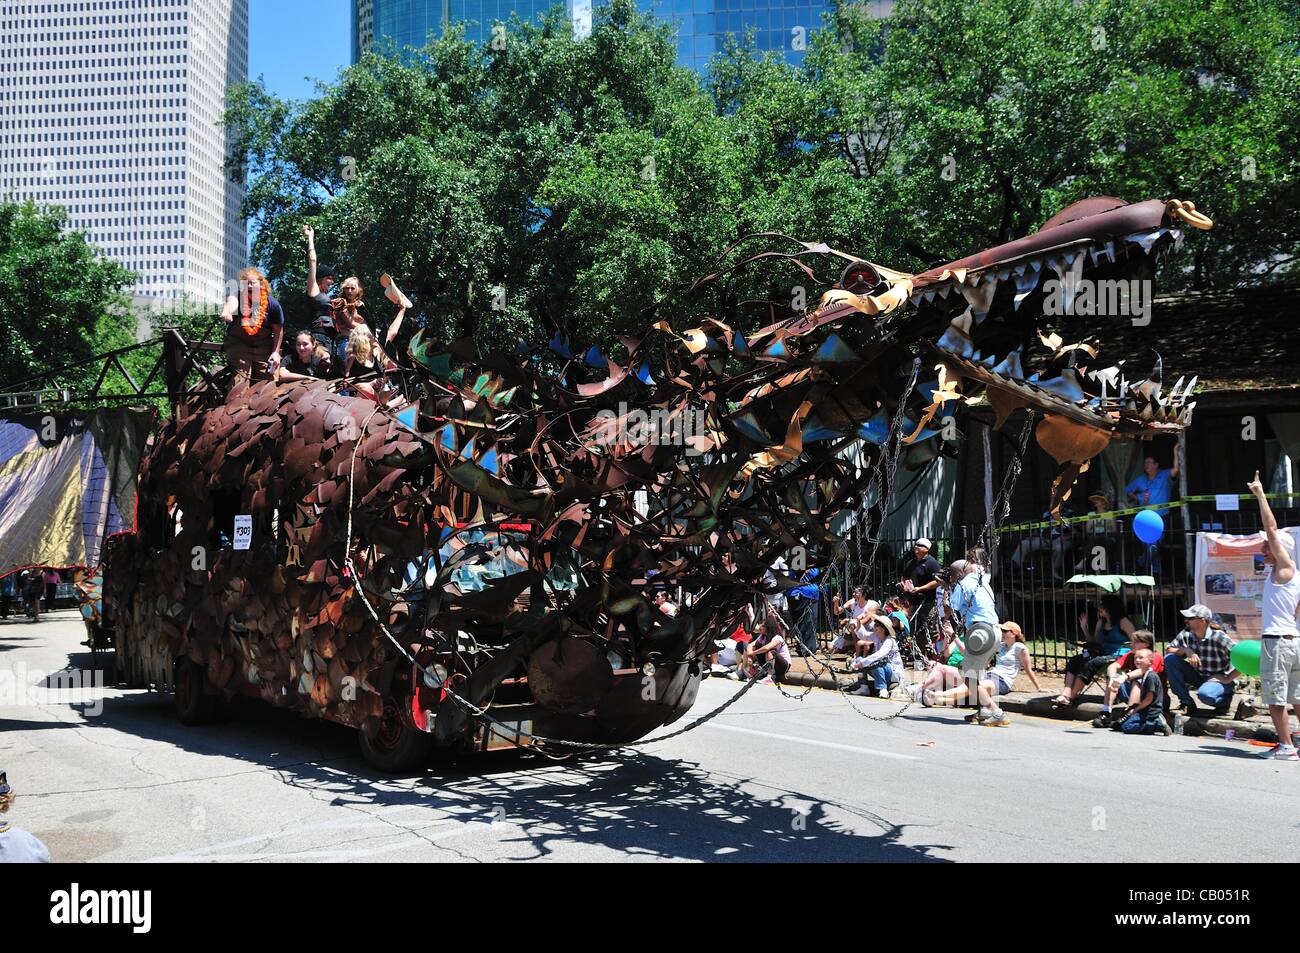 Annual Art Car Parade held in downtown Houston, Texas, USA, on May 12, 2012. Rusty steel dragon. Stock Photo